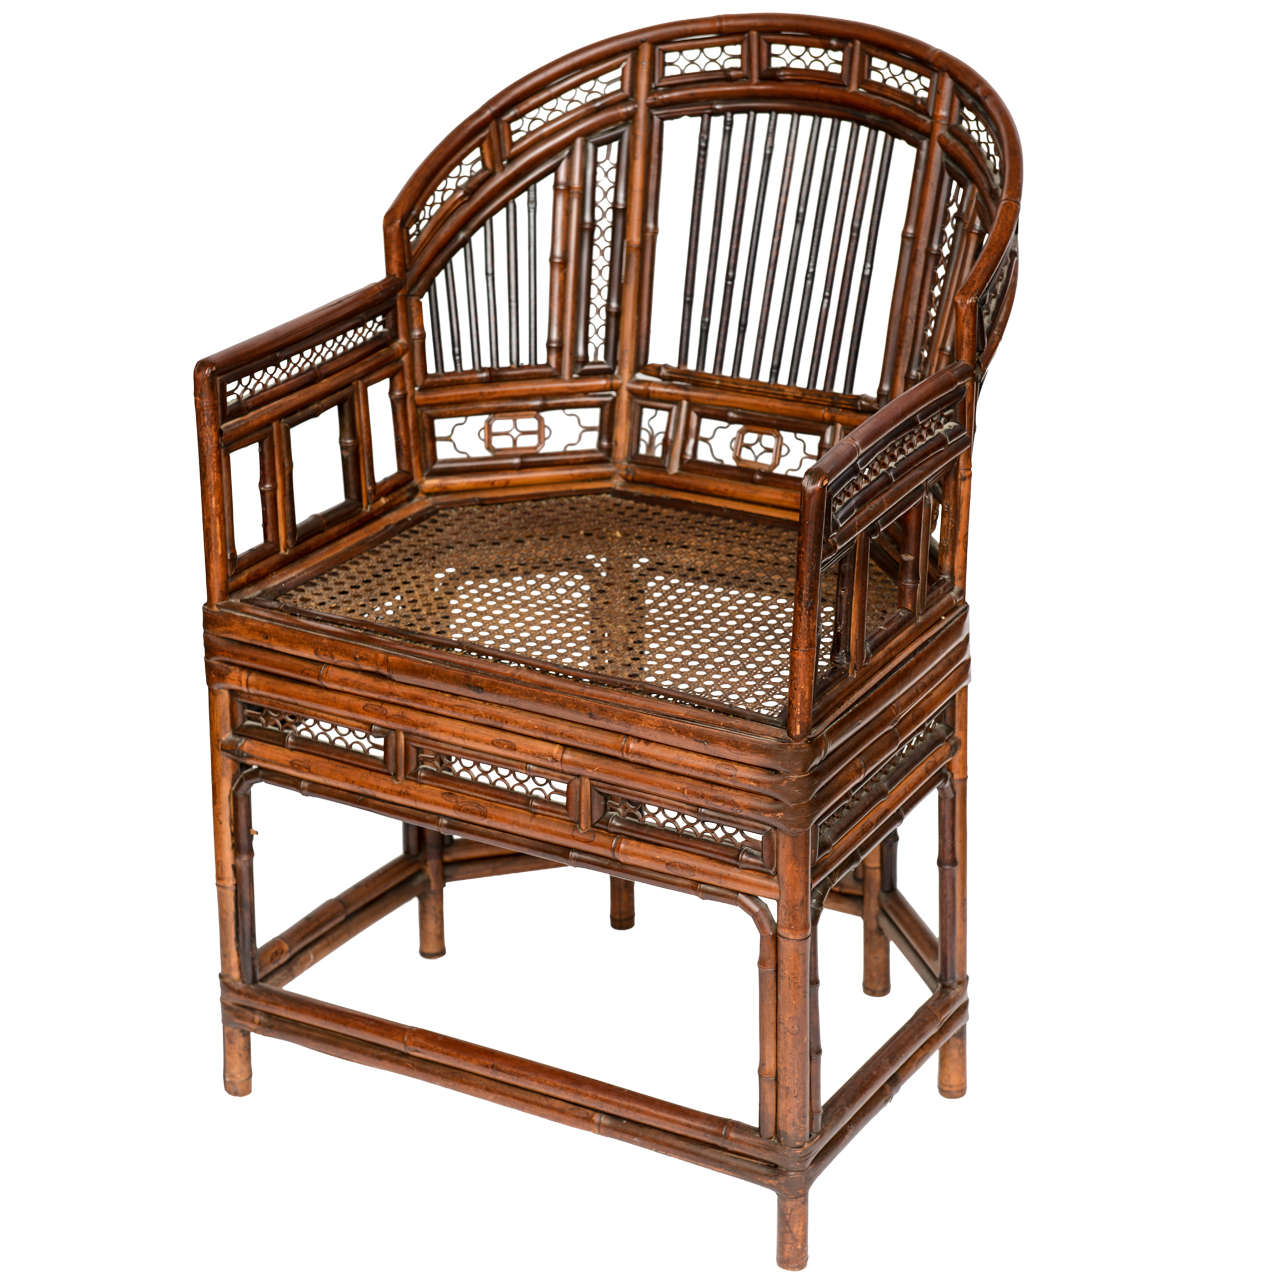 A Fine Chinese Export Bent Bamboo Armchair